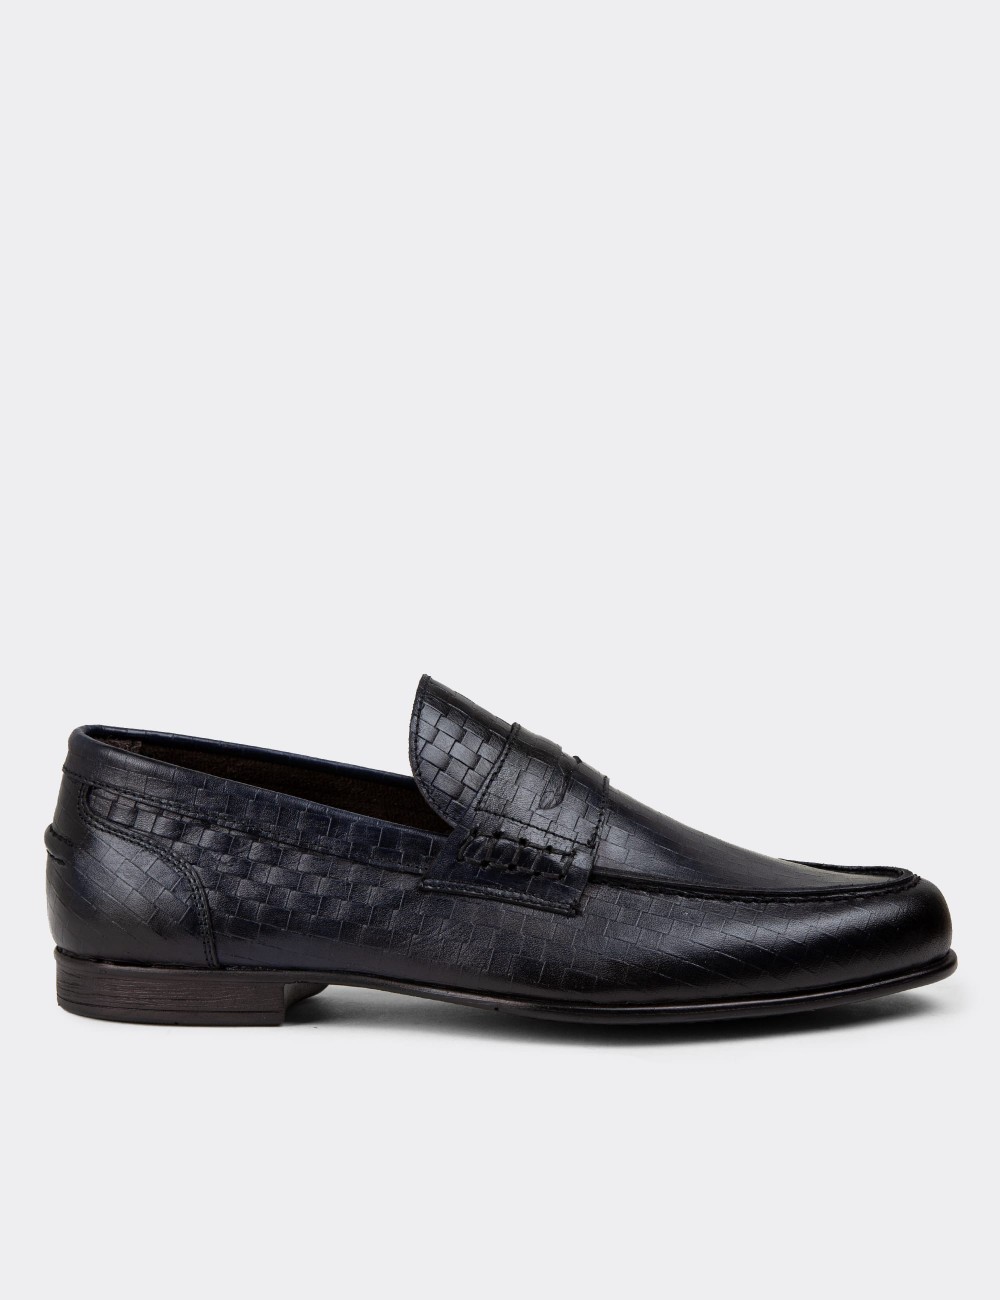 Navy Leather Loafers - 01978MLCVC08